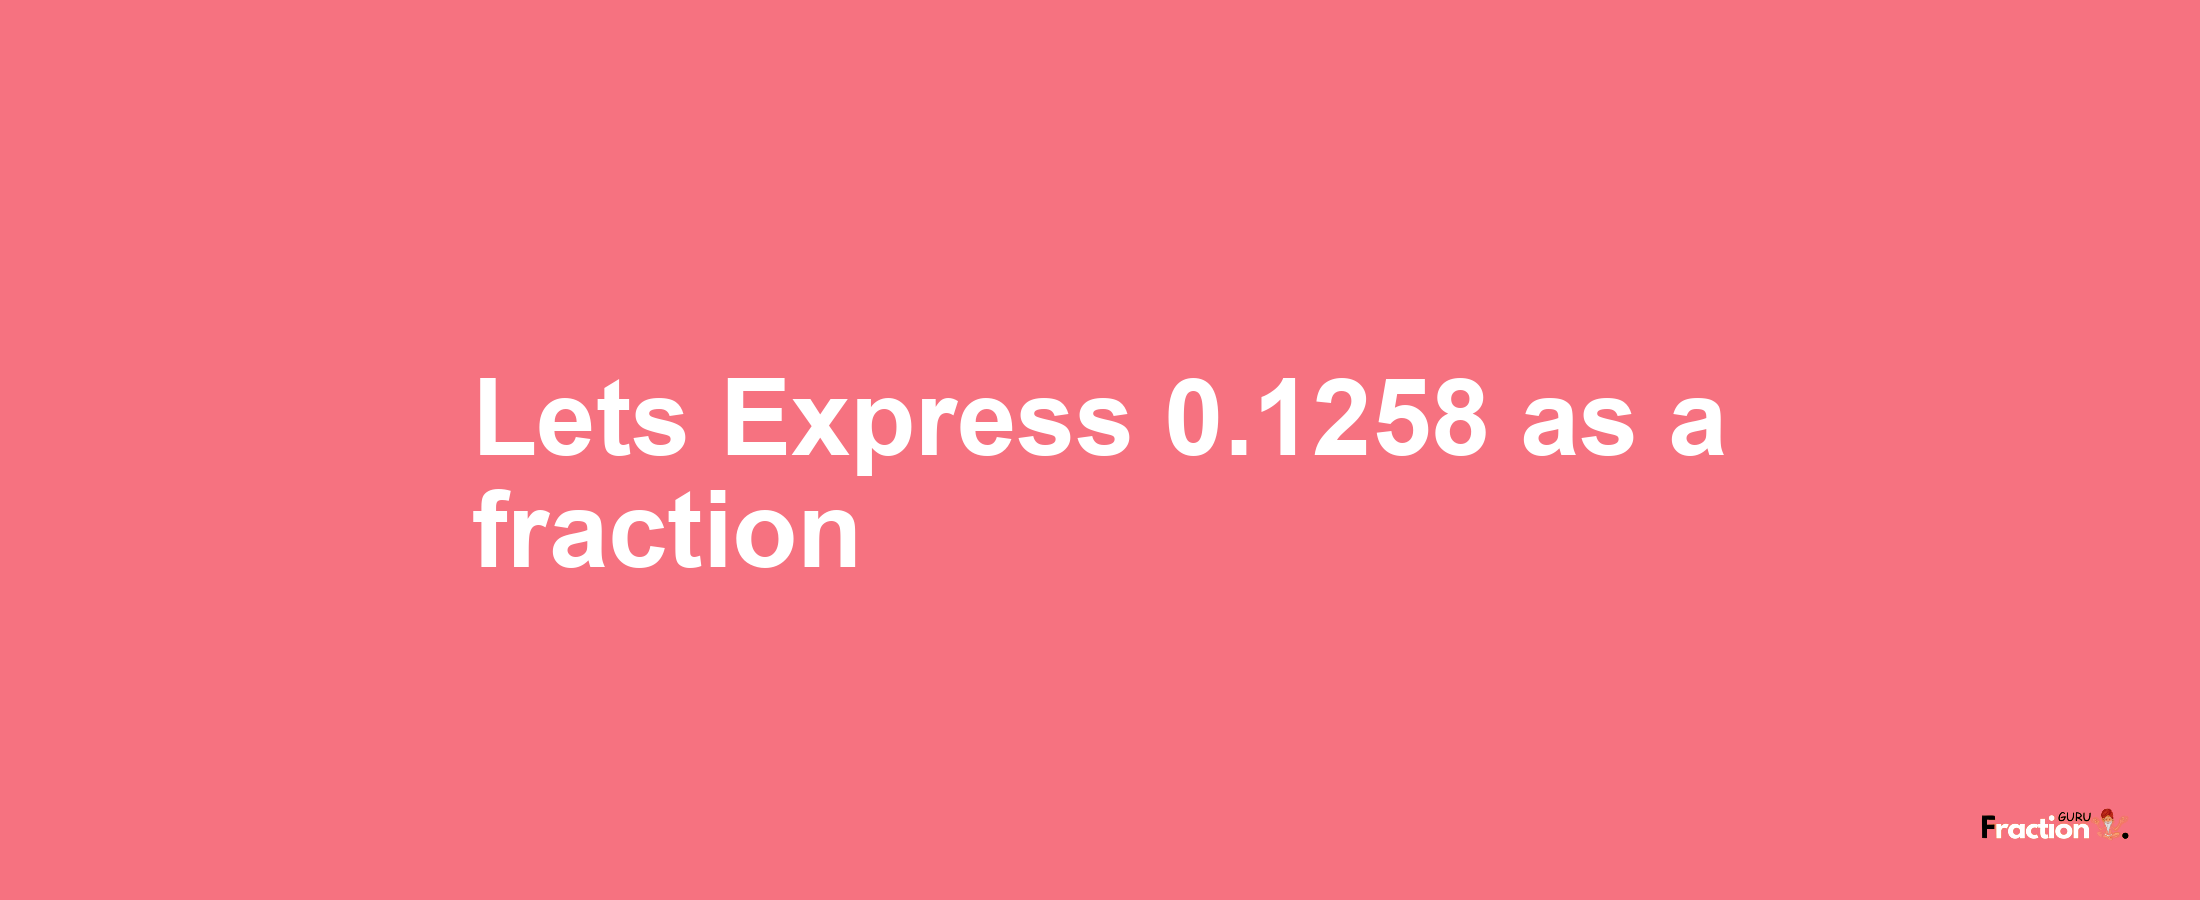 Lets Express 0.1258 as afraction